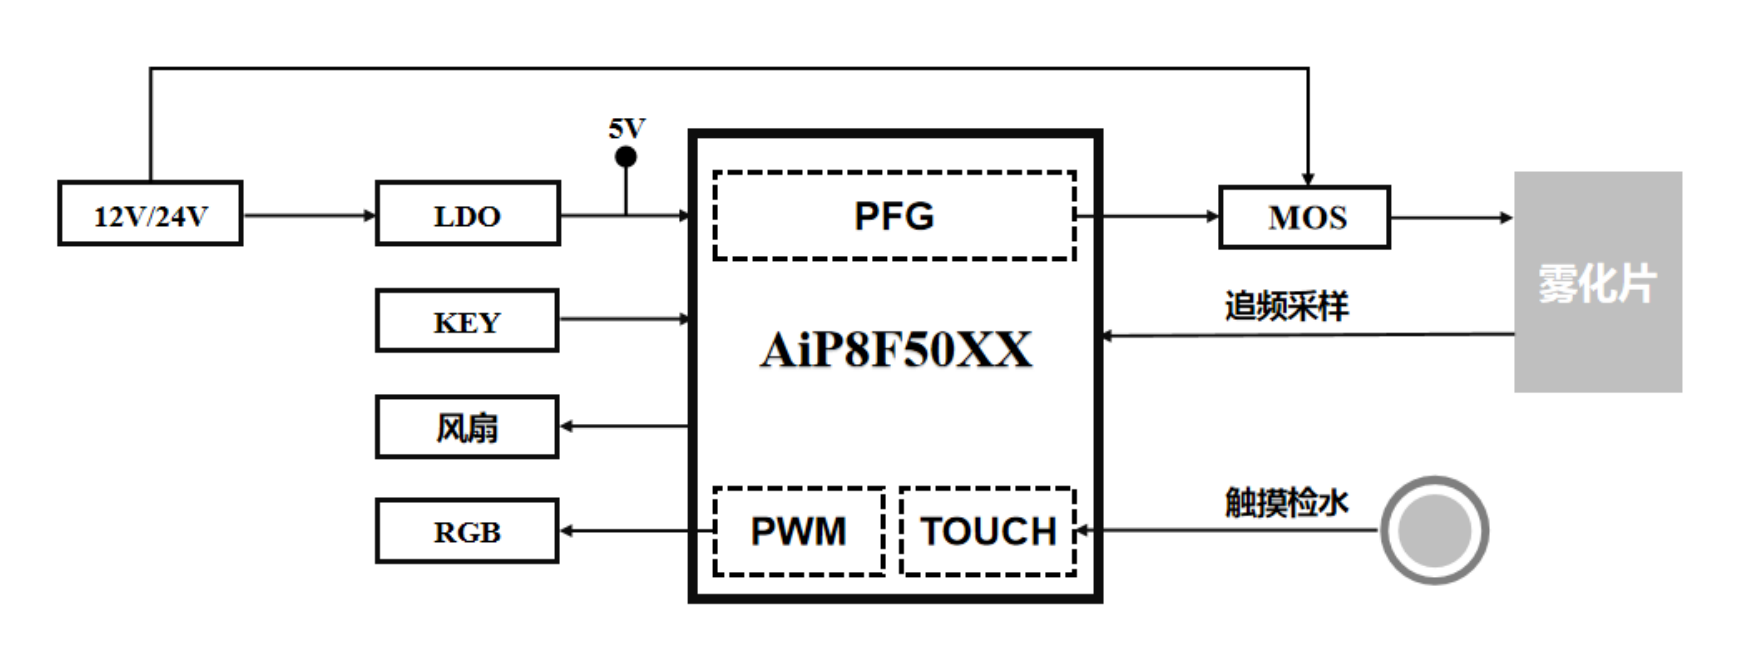 AiP8F50XX方案框图.png